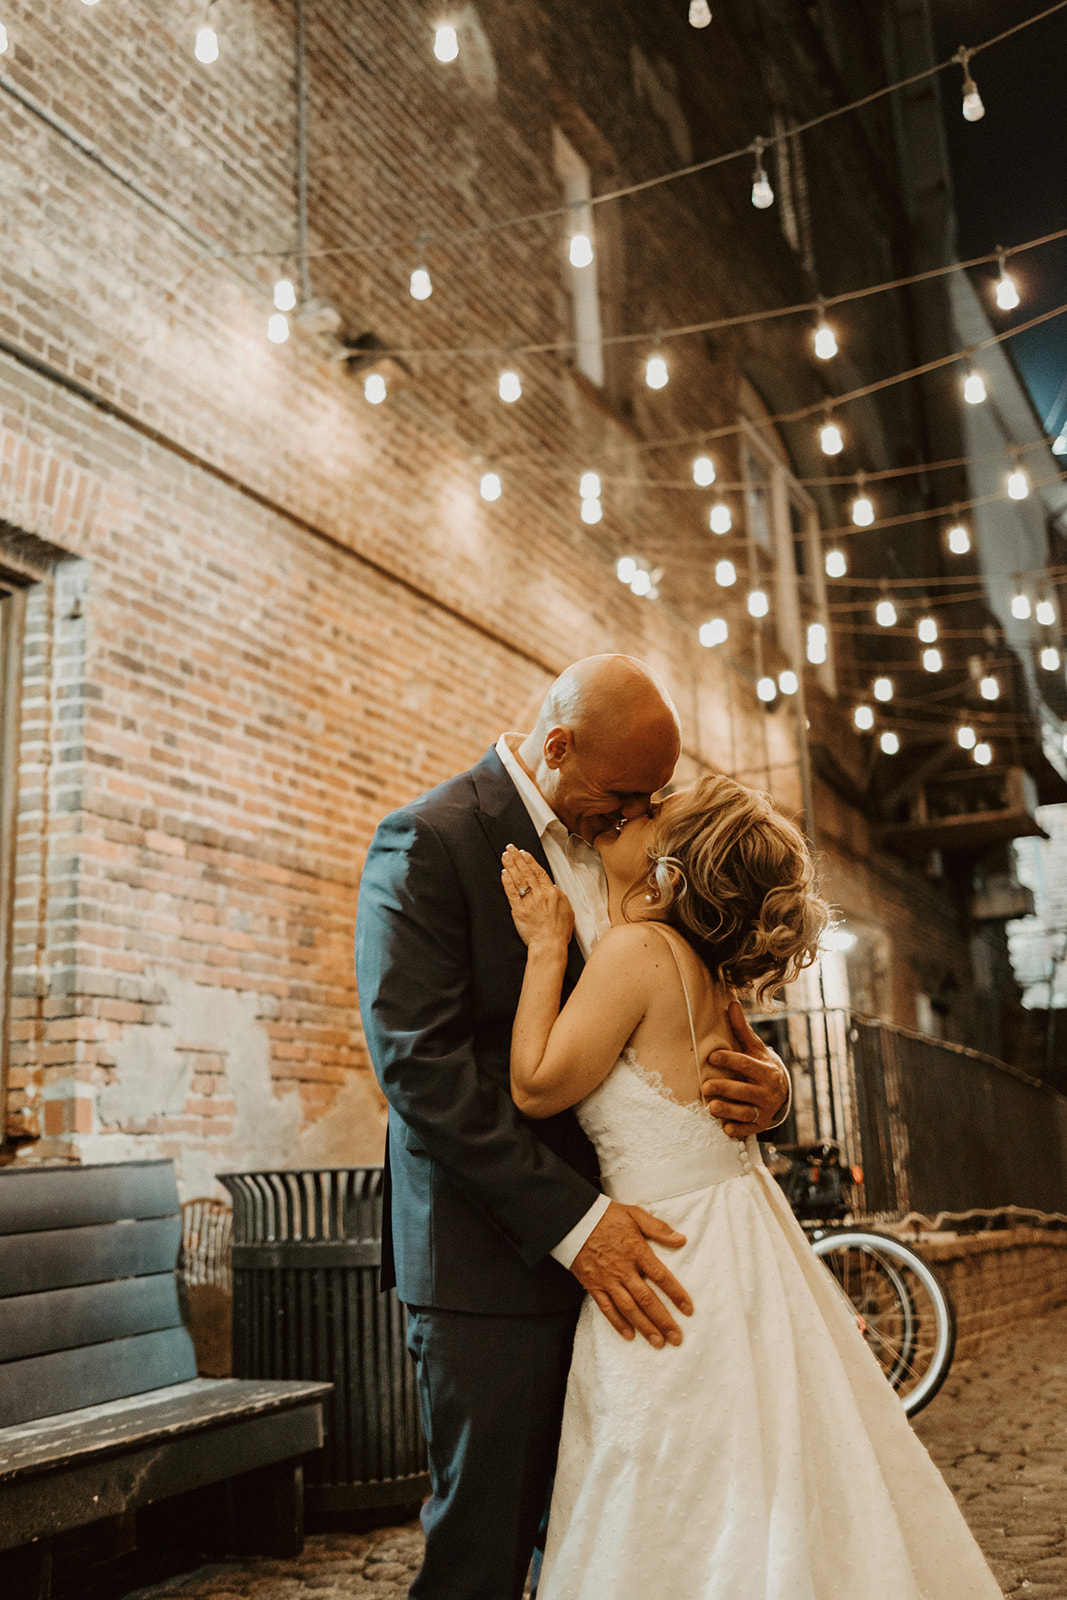 the couple kissing under lights to celebrate their Savannah Georgia Elopement